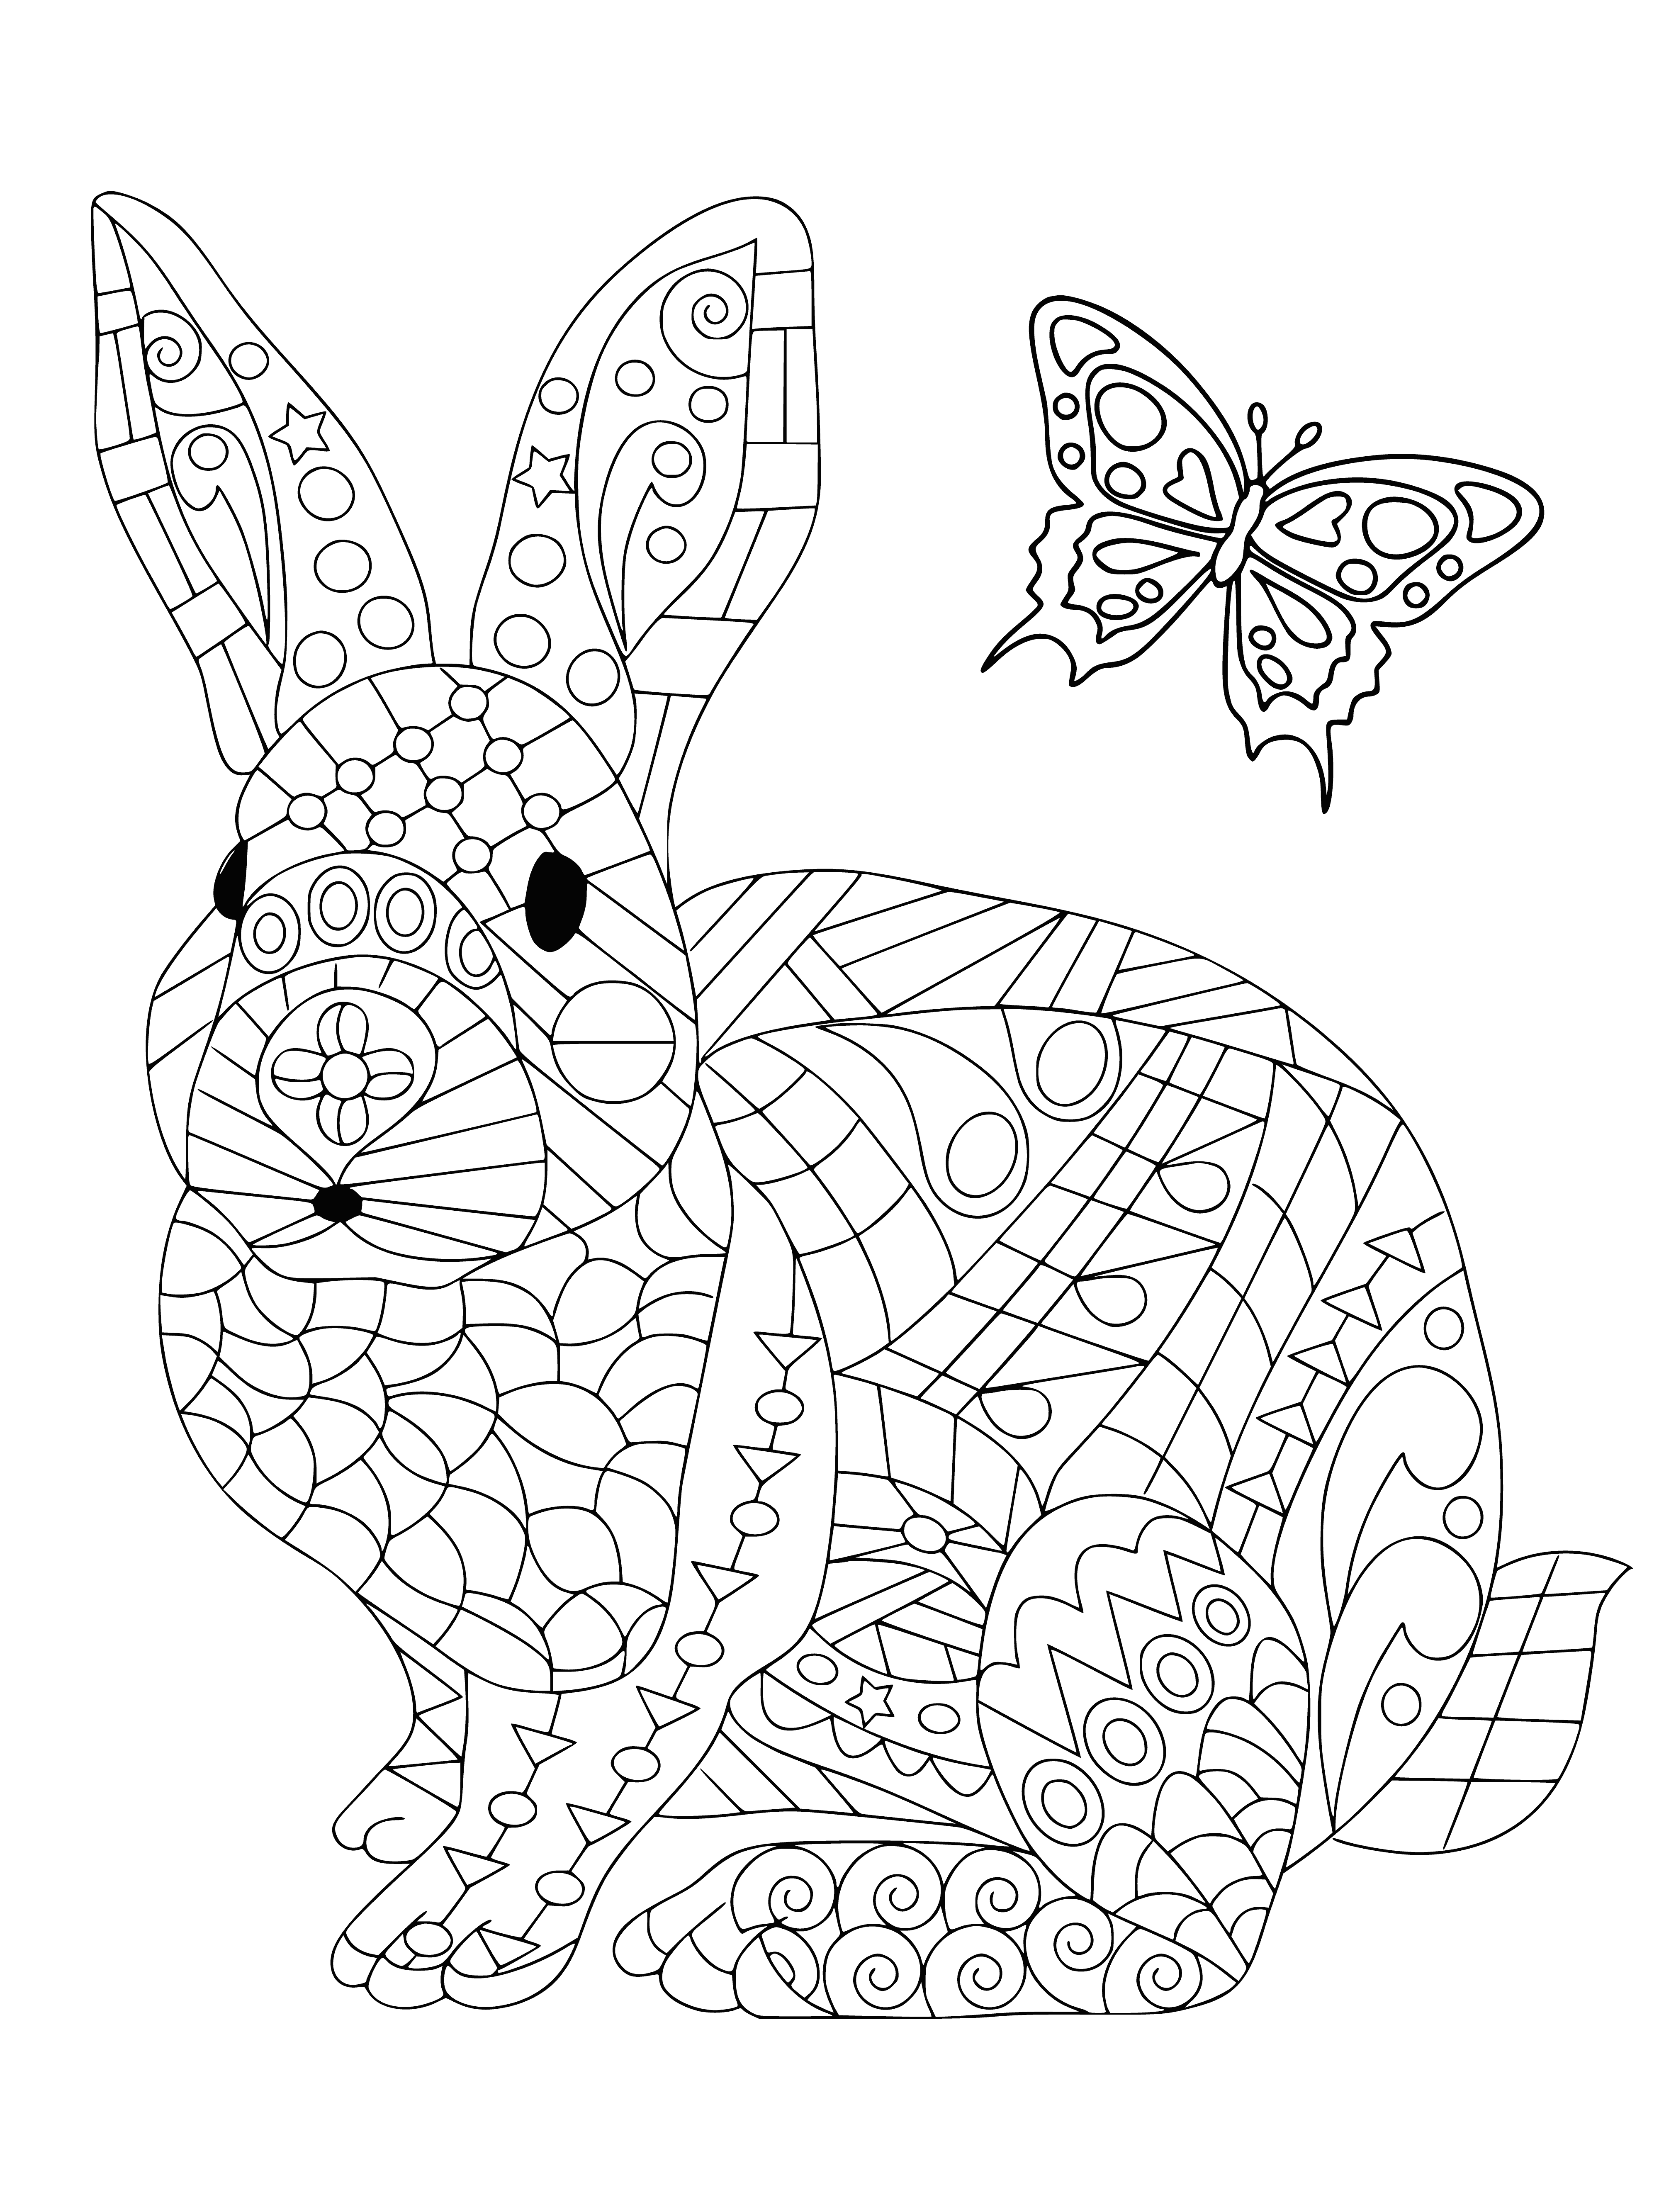 Rabbit and butterfly coloring page